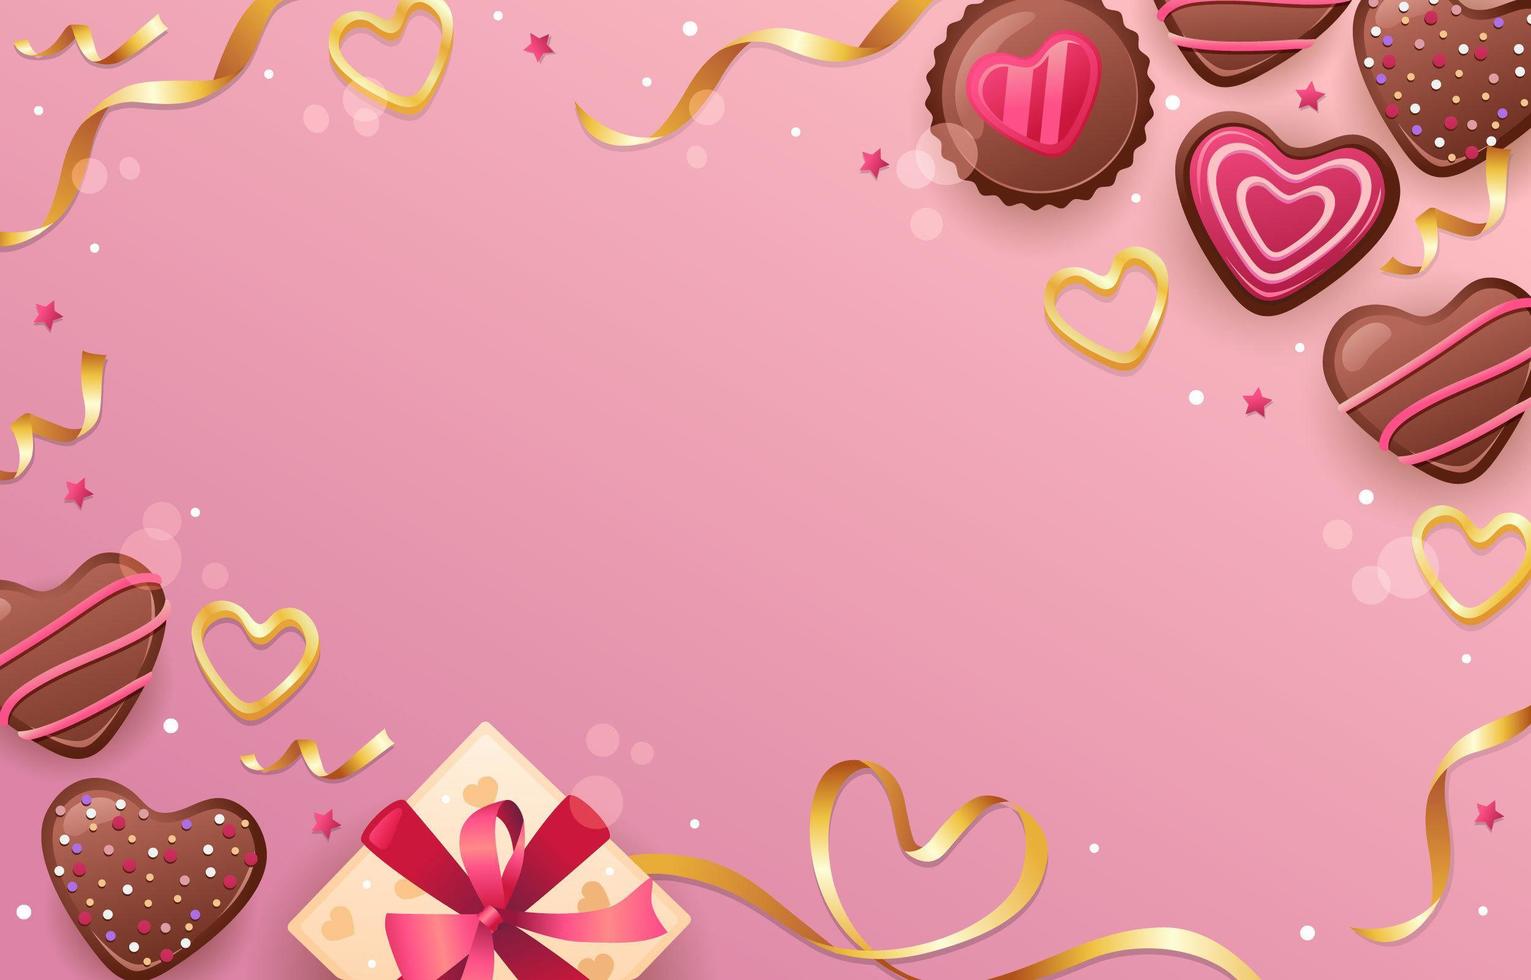 Sweet Love Chocolate with Ribbons vector